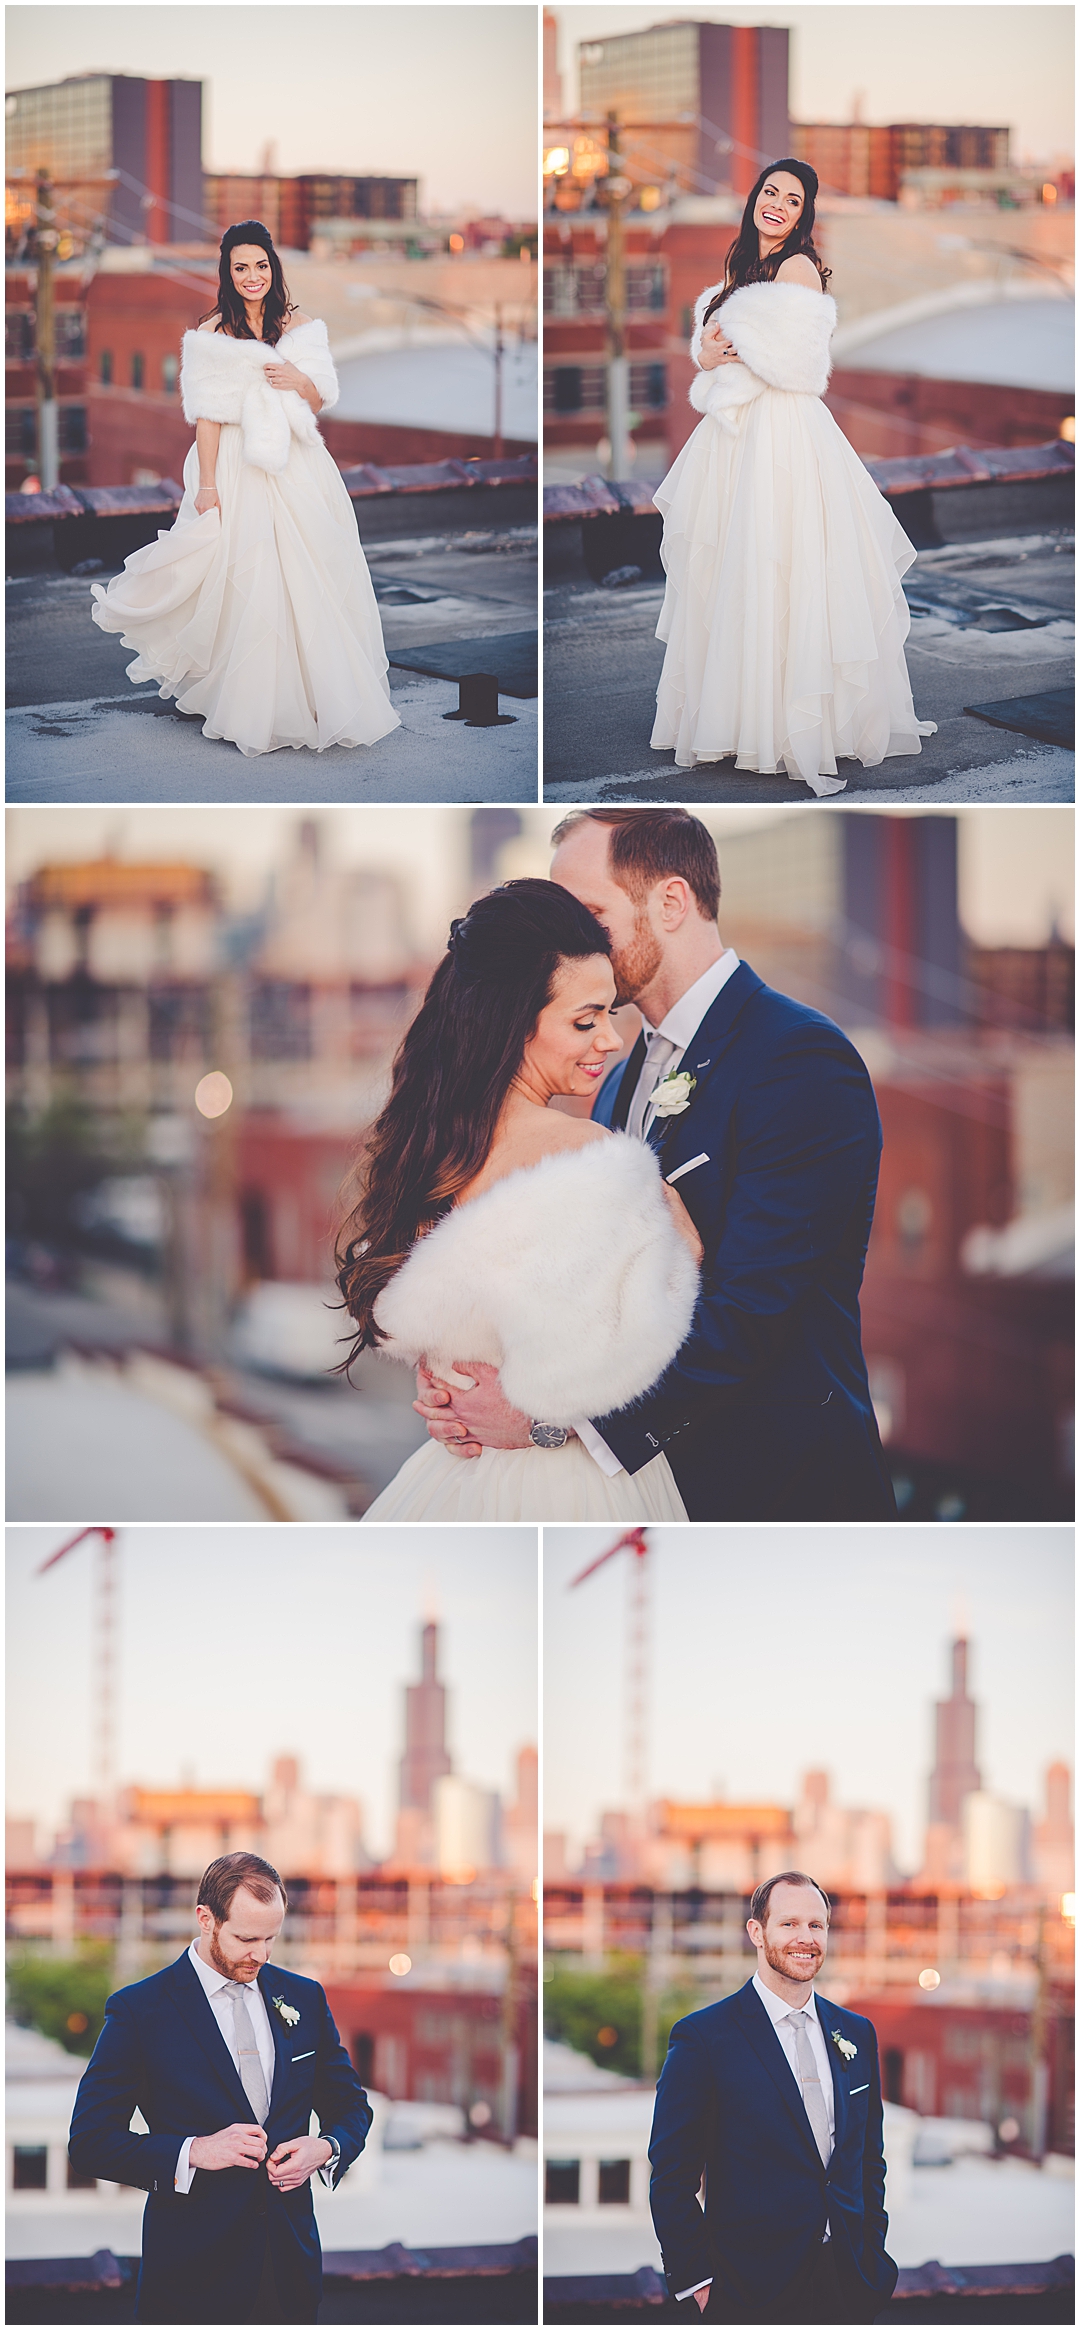 Romantic Blush & Gold Wedding Day at Room 1520 in Chicago, Illinois with Chicagoland Wedding Photographer Kara Evans Photographer